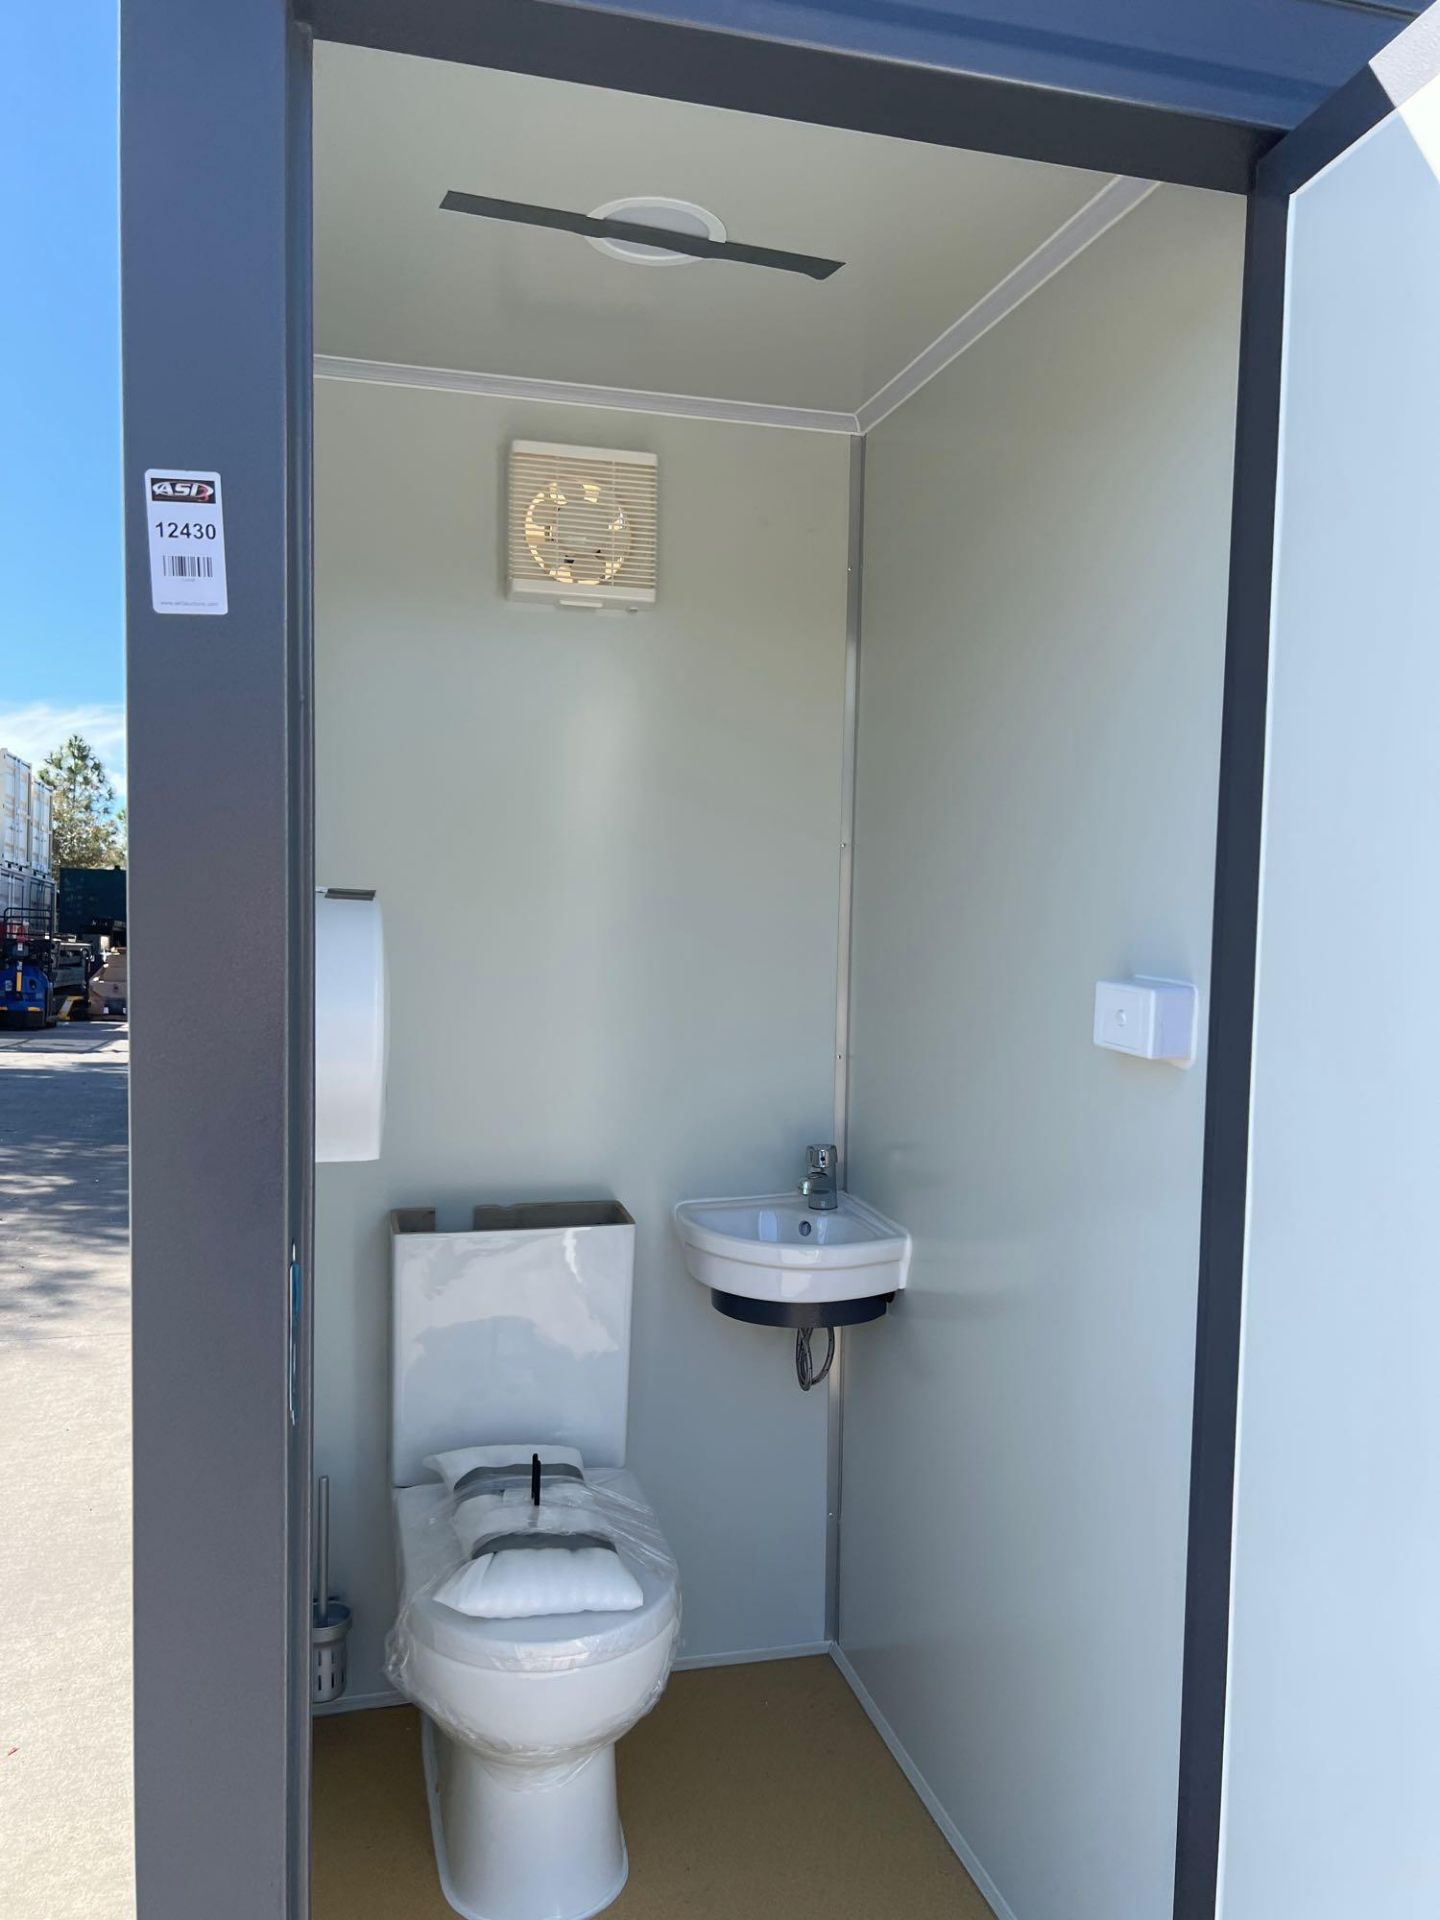 UNUSED PORTABLE DOUBLE BATHROOM UNIT, 2 STALLS, ELECTRIC & PLUMBING HOOK UP WITH EXTERIOR PLUMBING C - Image 13 of 13